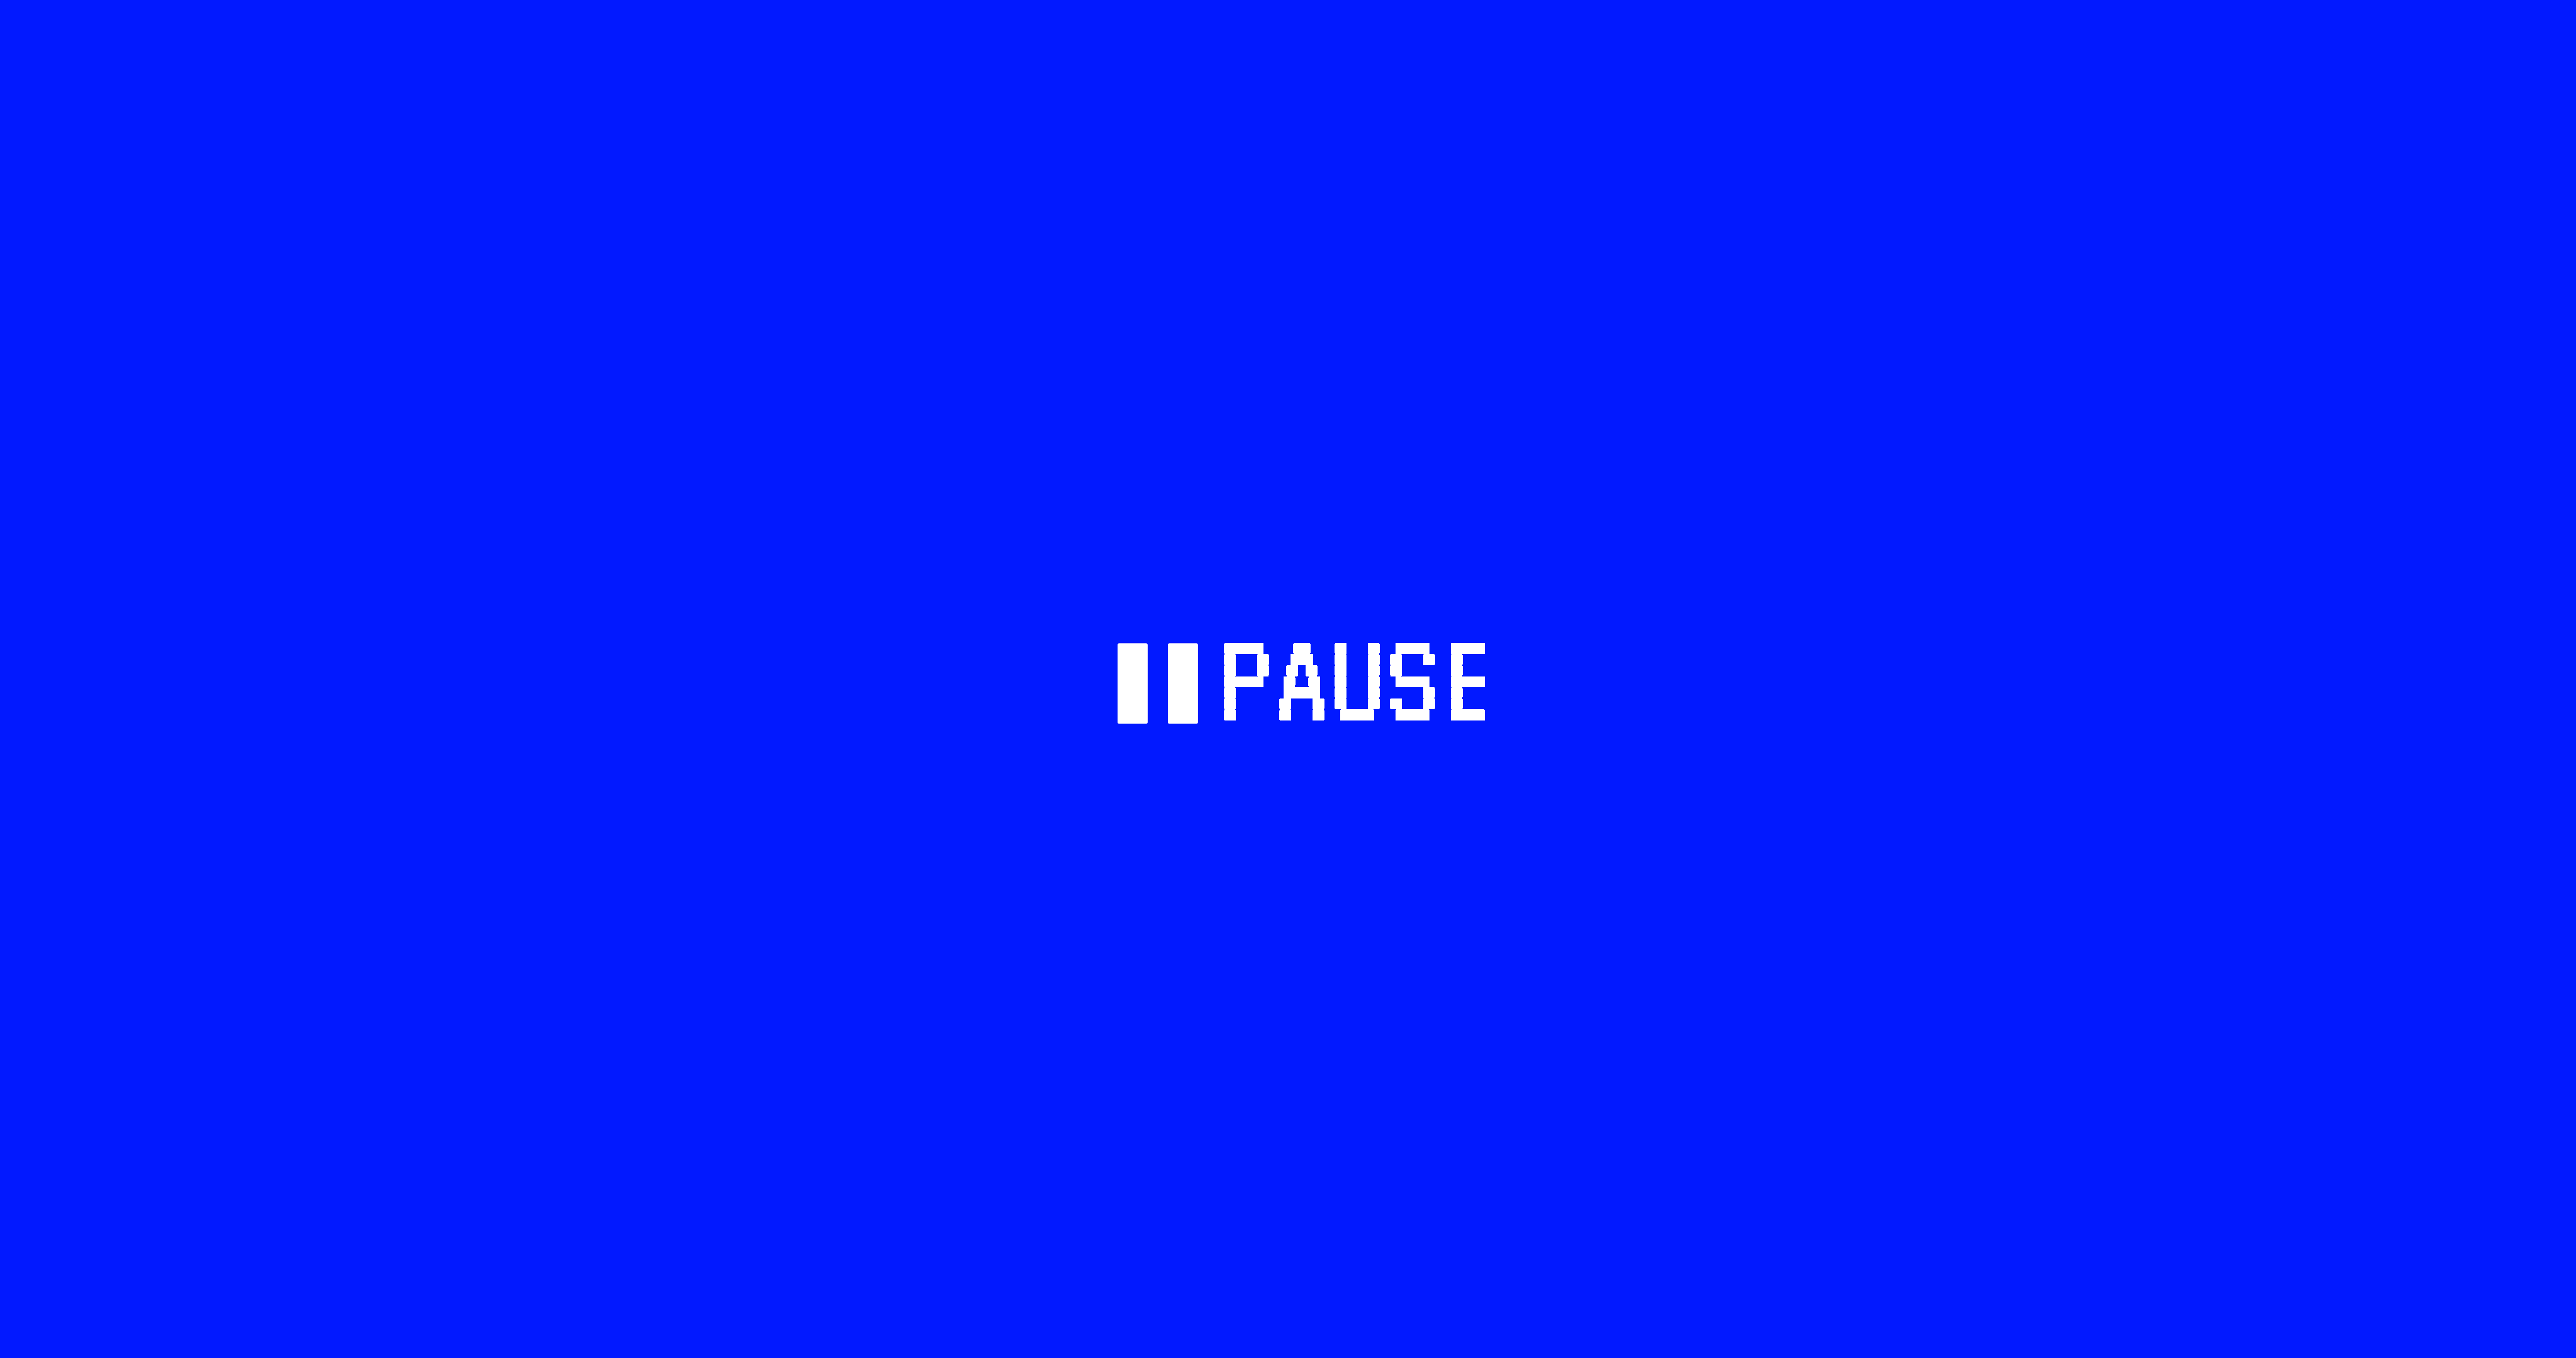 Pause.png